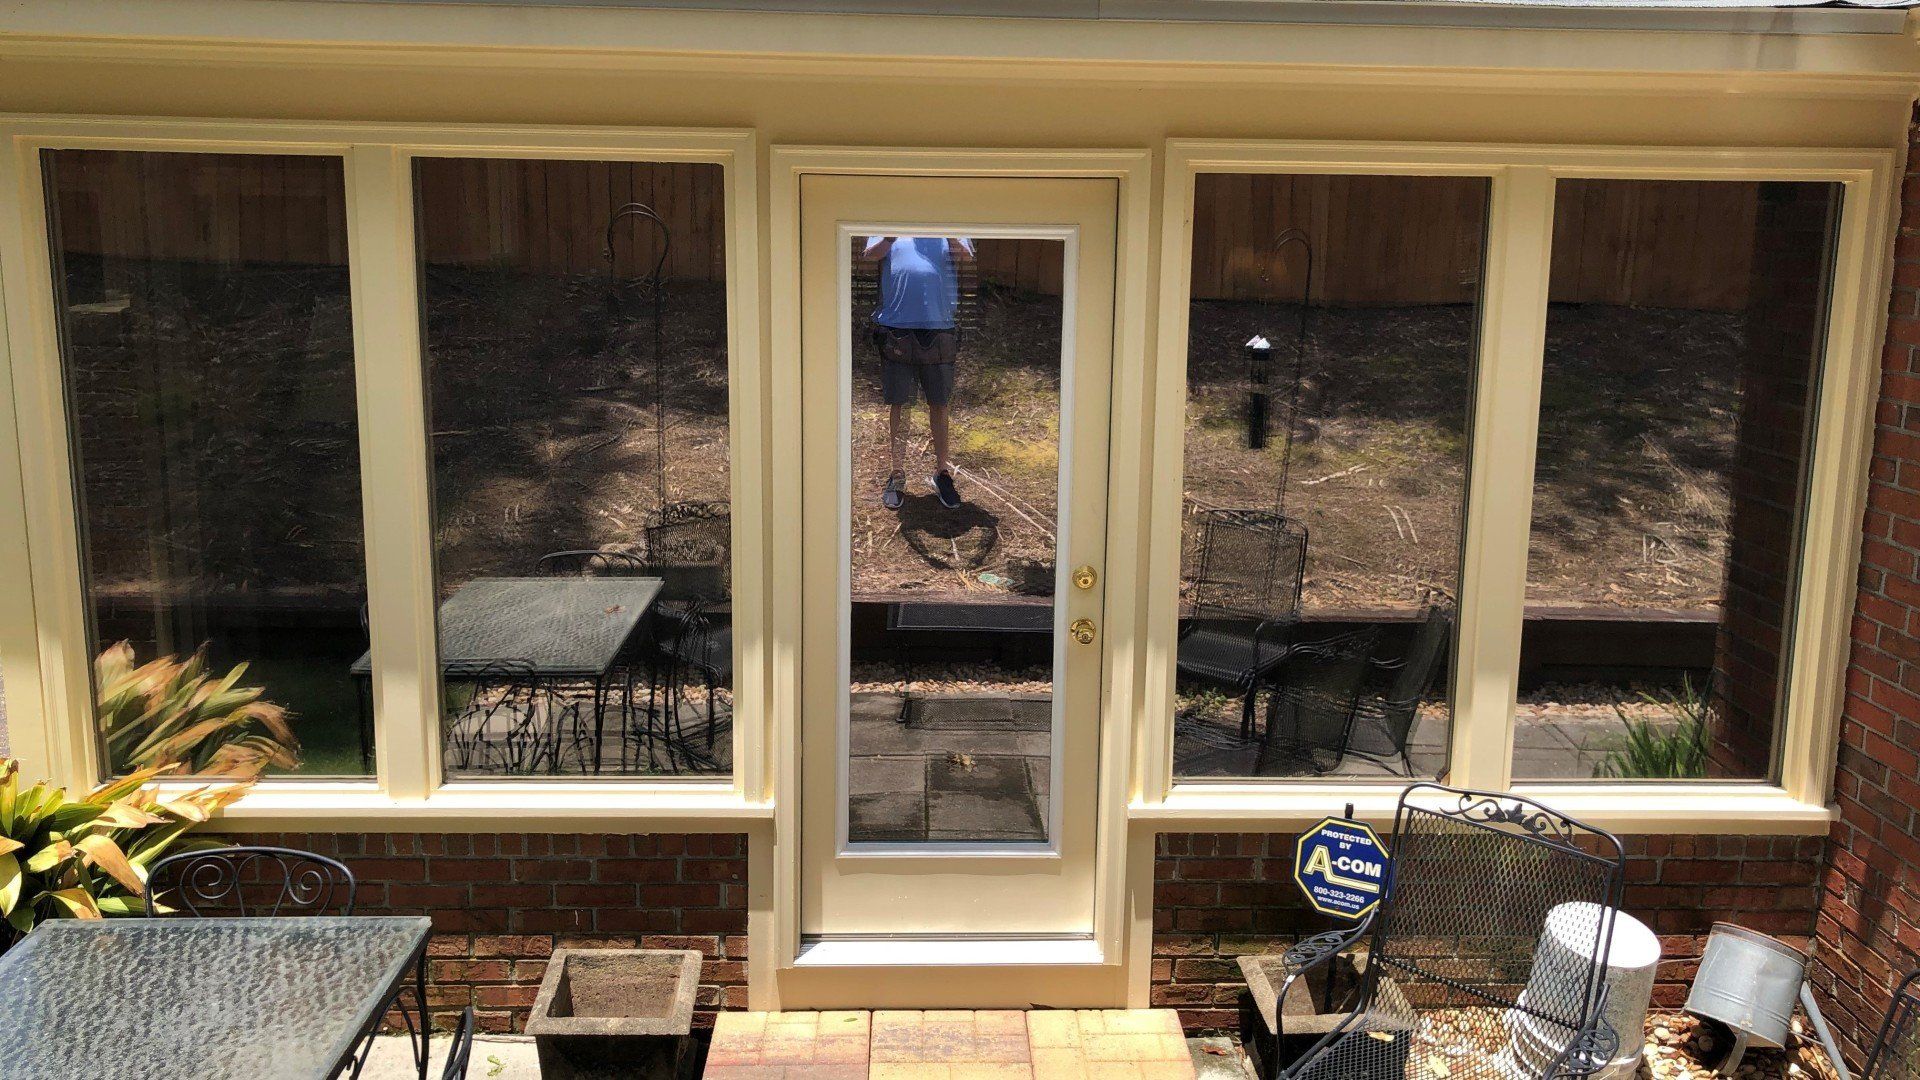 Home window tint installation service - This Sunroom became livable after SPF Lt Rose' Home Tint ends heat gain issues along with UV Harm.